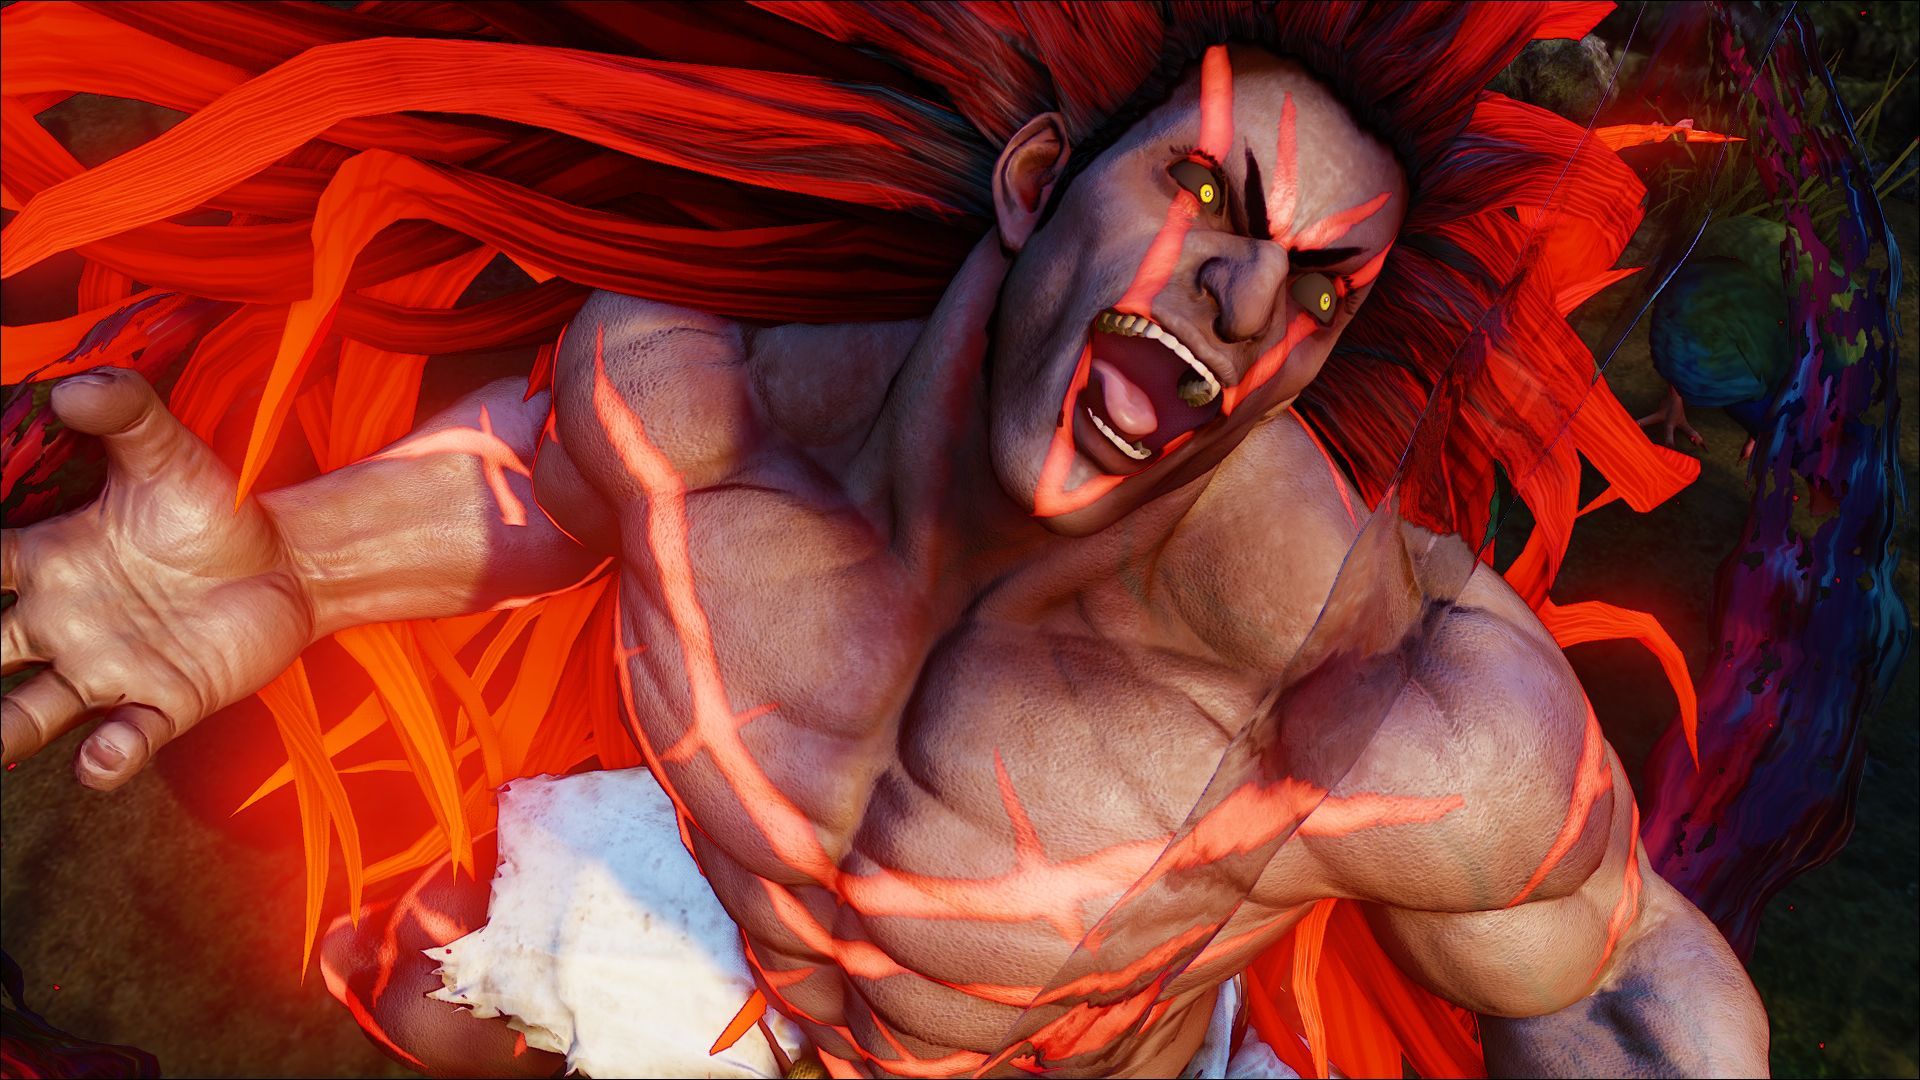 Fully New Street Fighter V Character Announced: Necalli